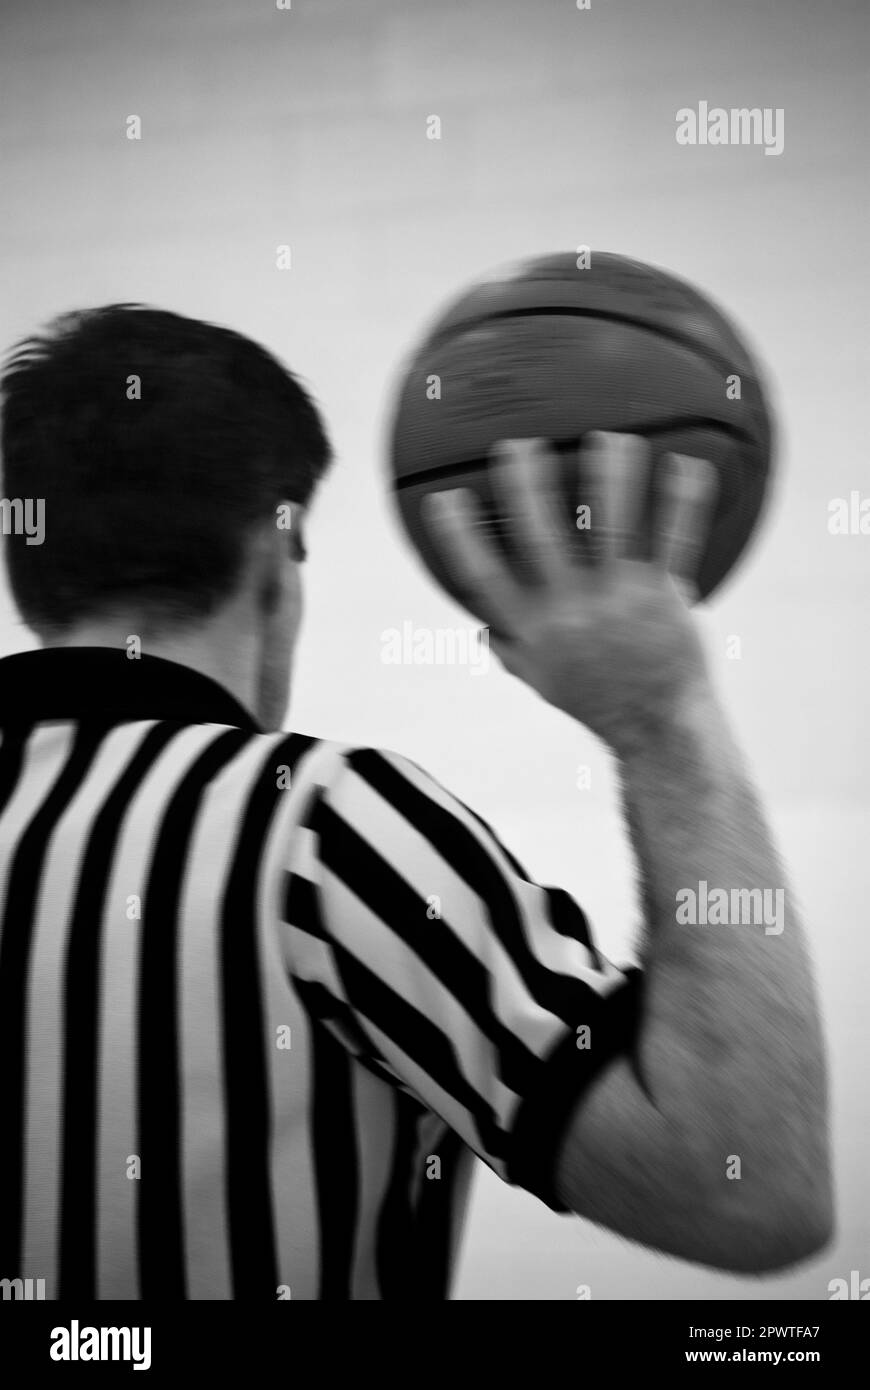 Basketball Referee holding ball black and white stripes on shirt calling game Stock Photo